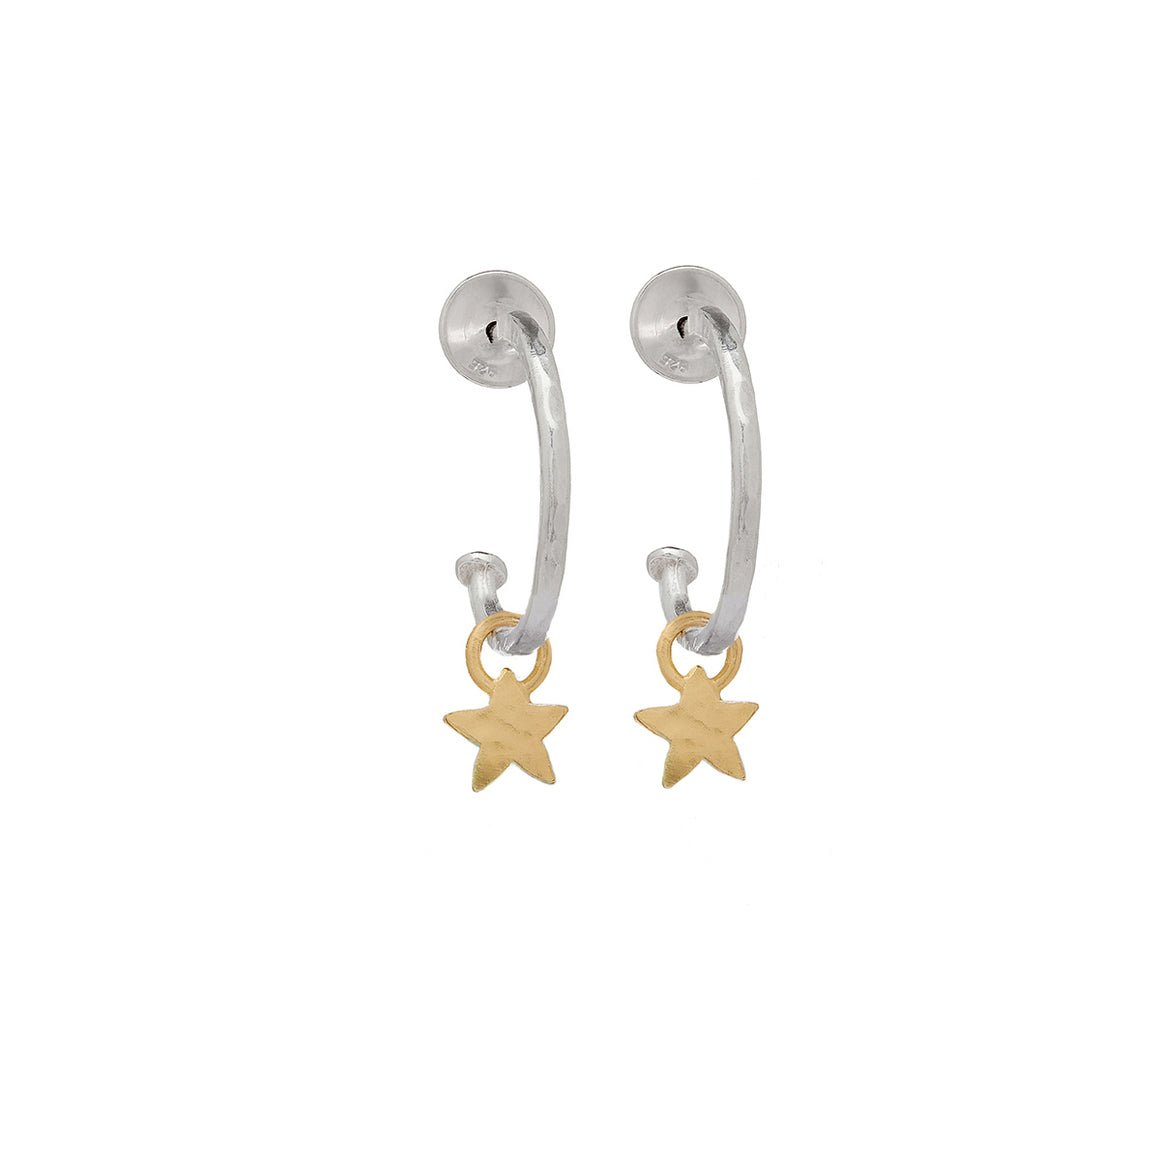 Small Silver Hoop earrings With Solid Gold Star